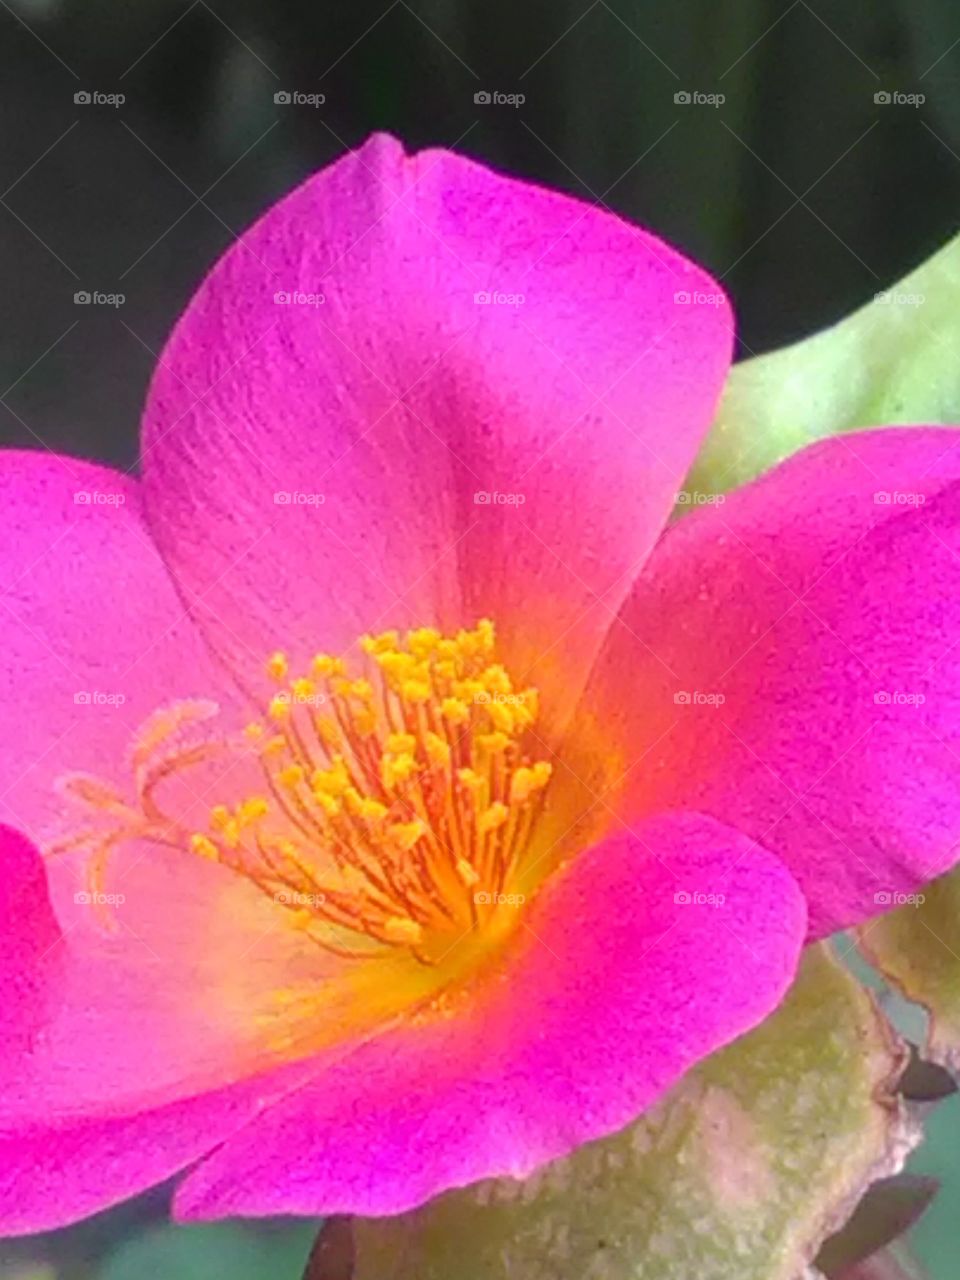 Inside the flower of pink, the pollen particle loses its form after only fading in a single day.